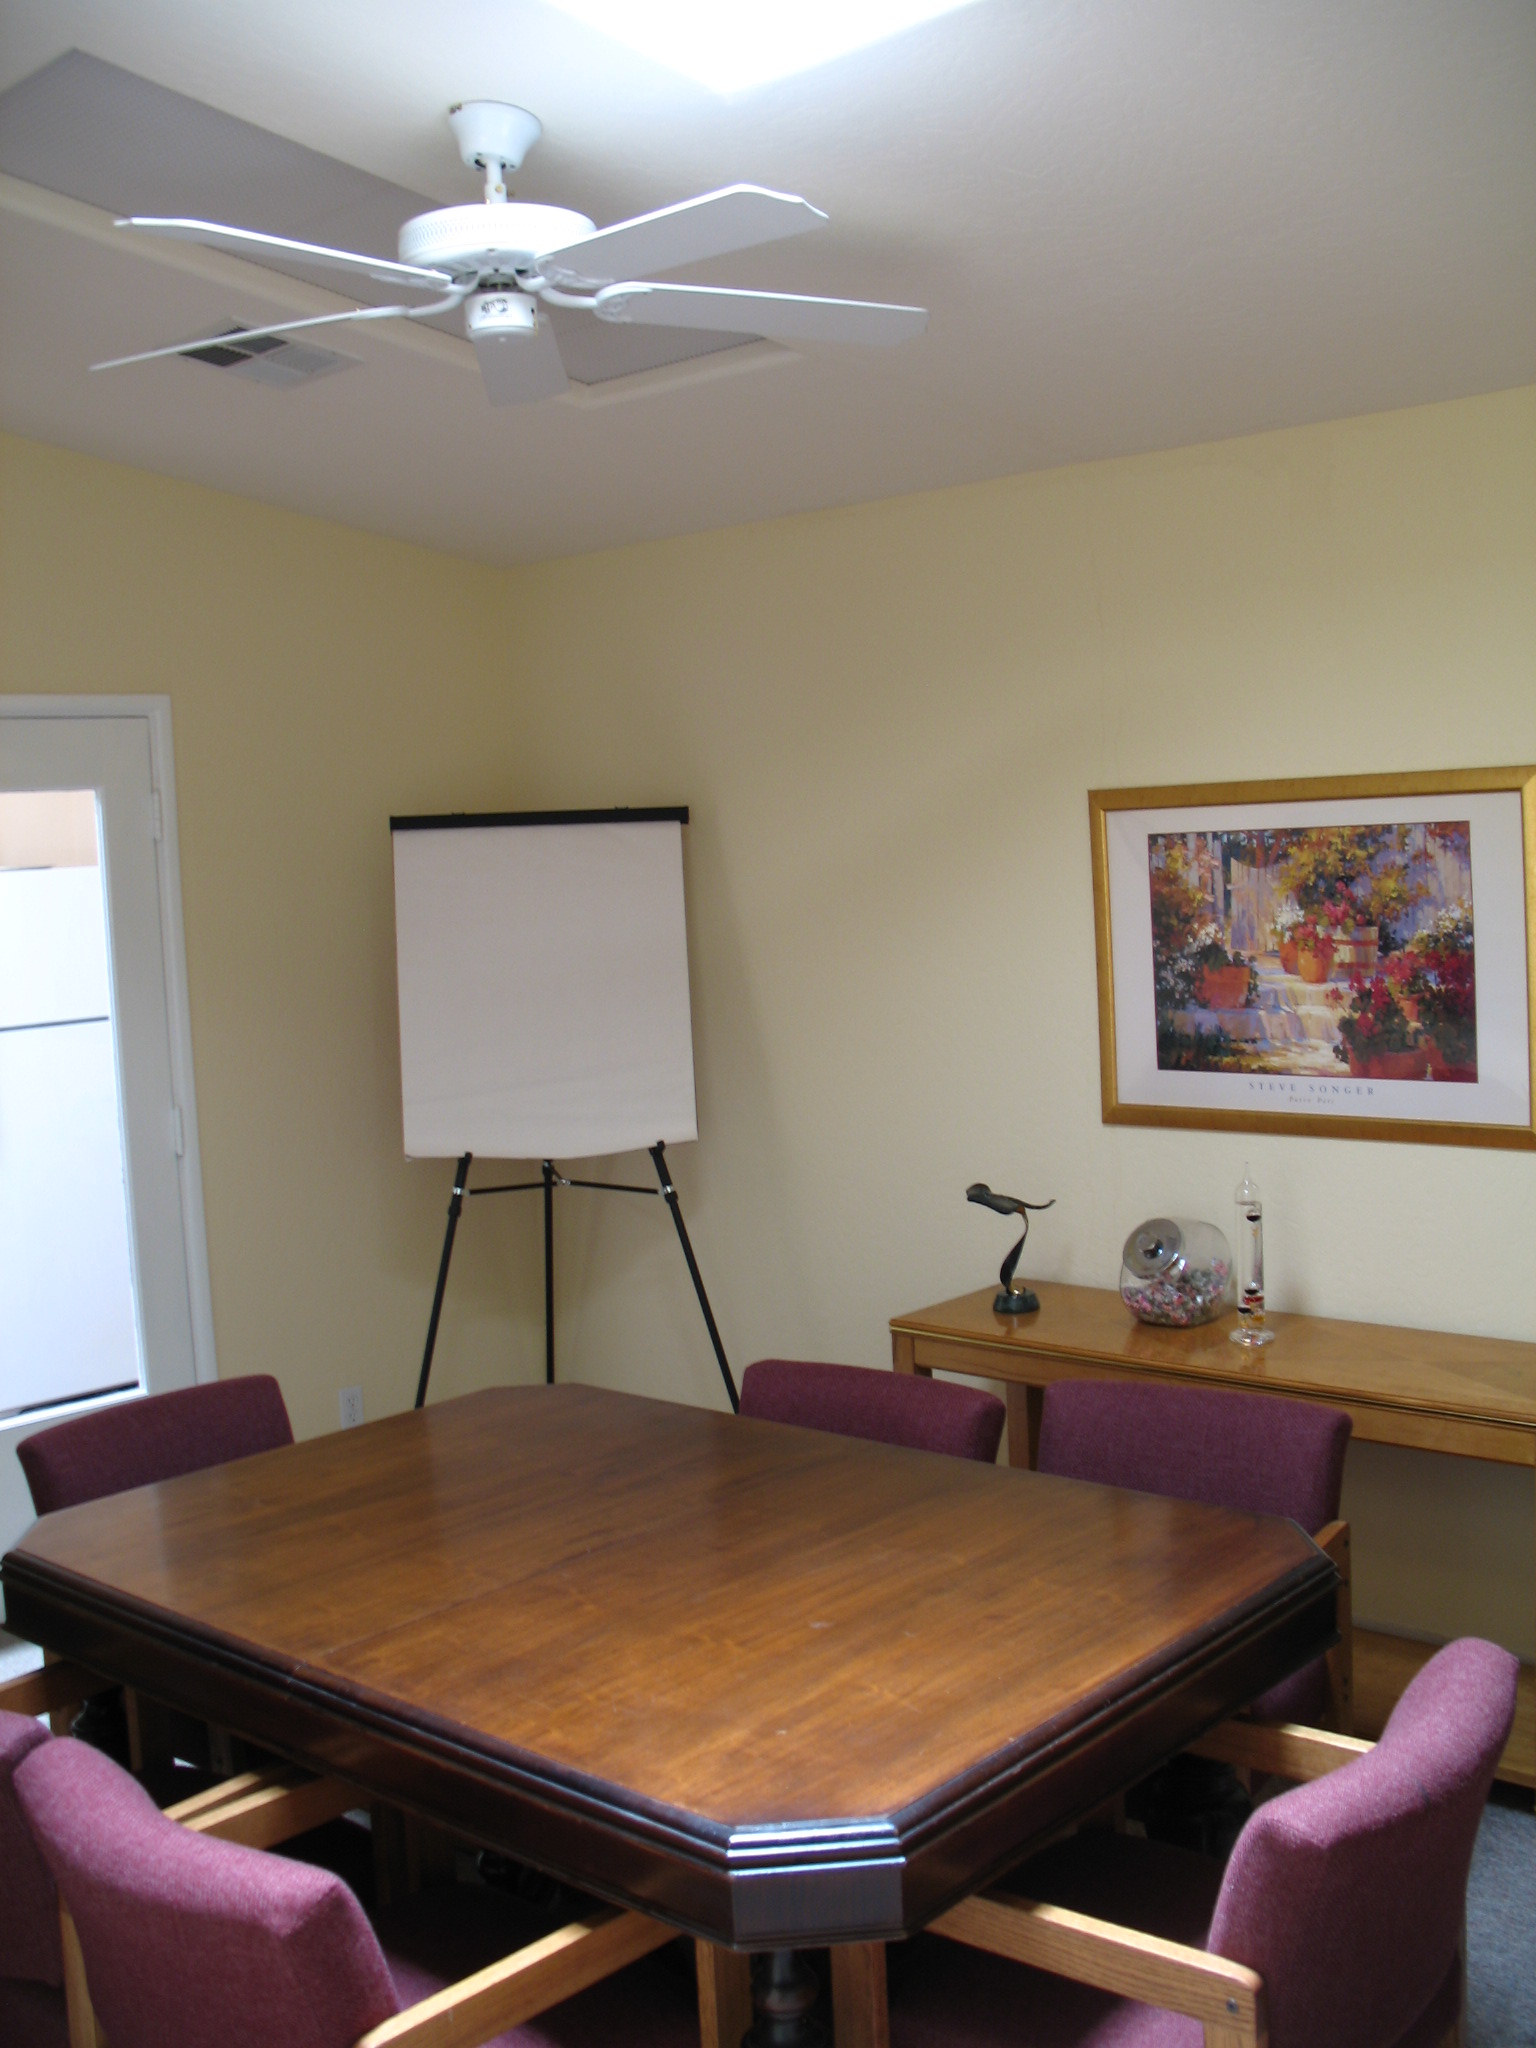 Conference room interior at Fig Garden Executive Suites